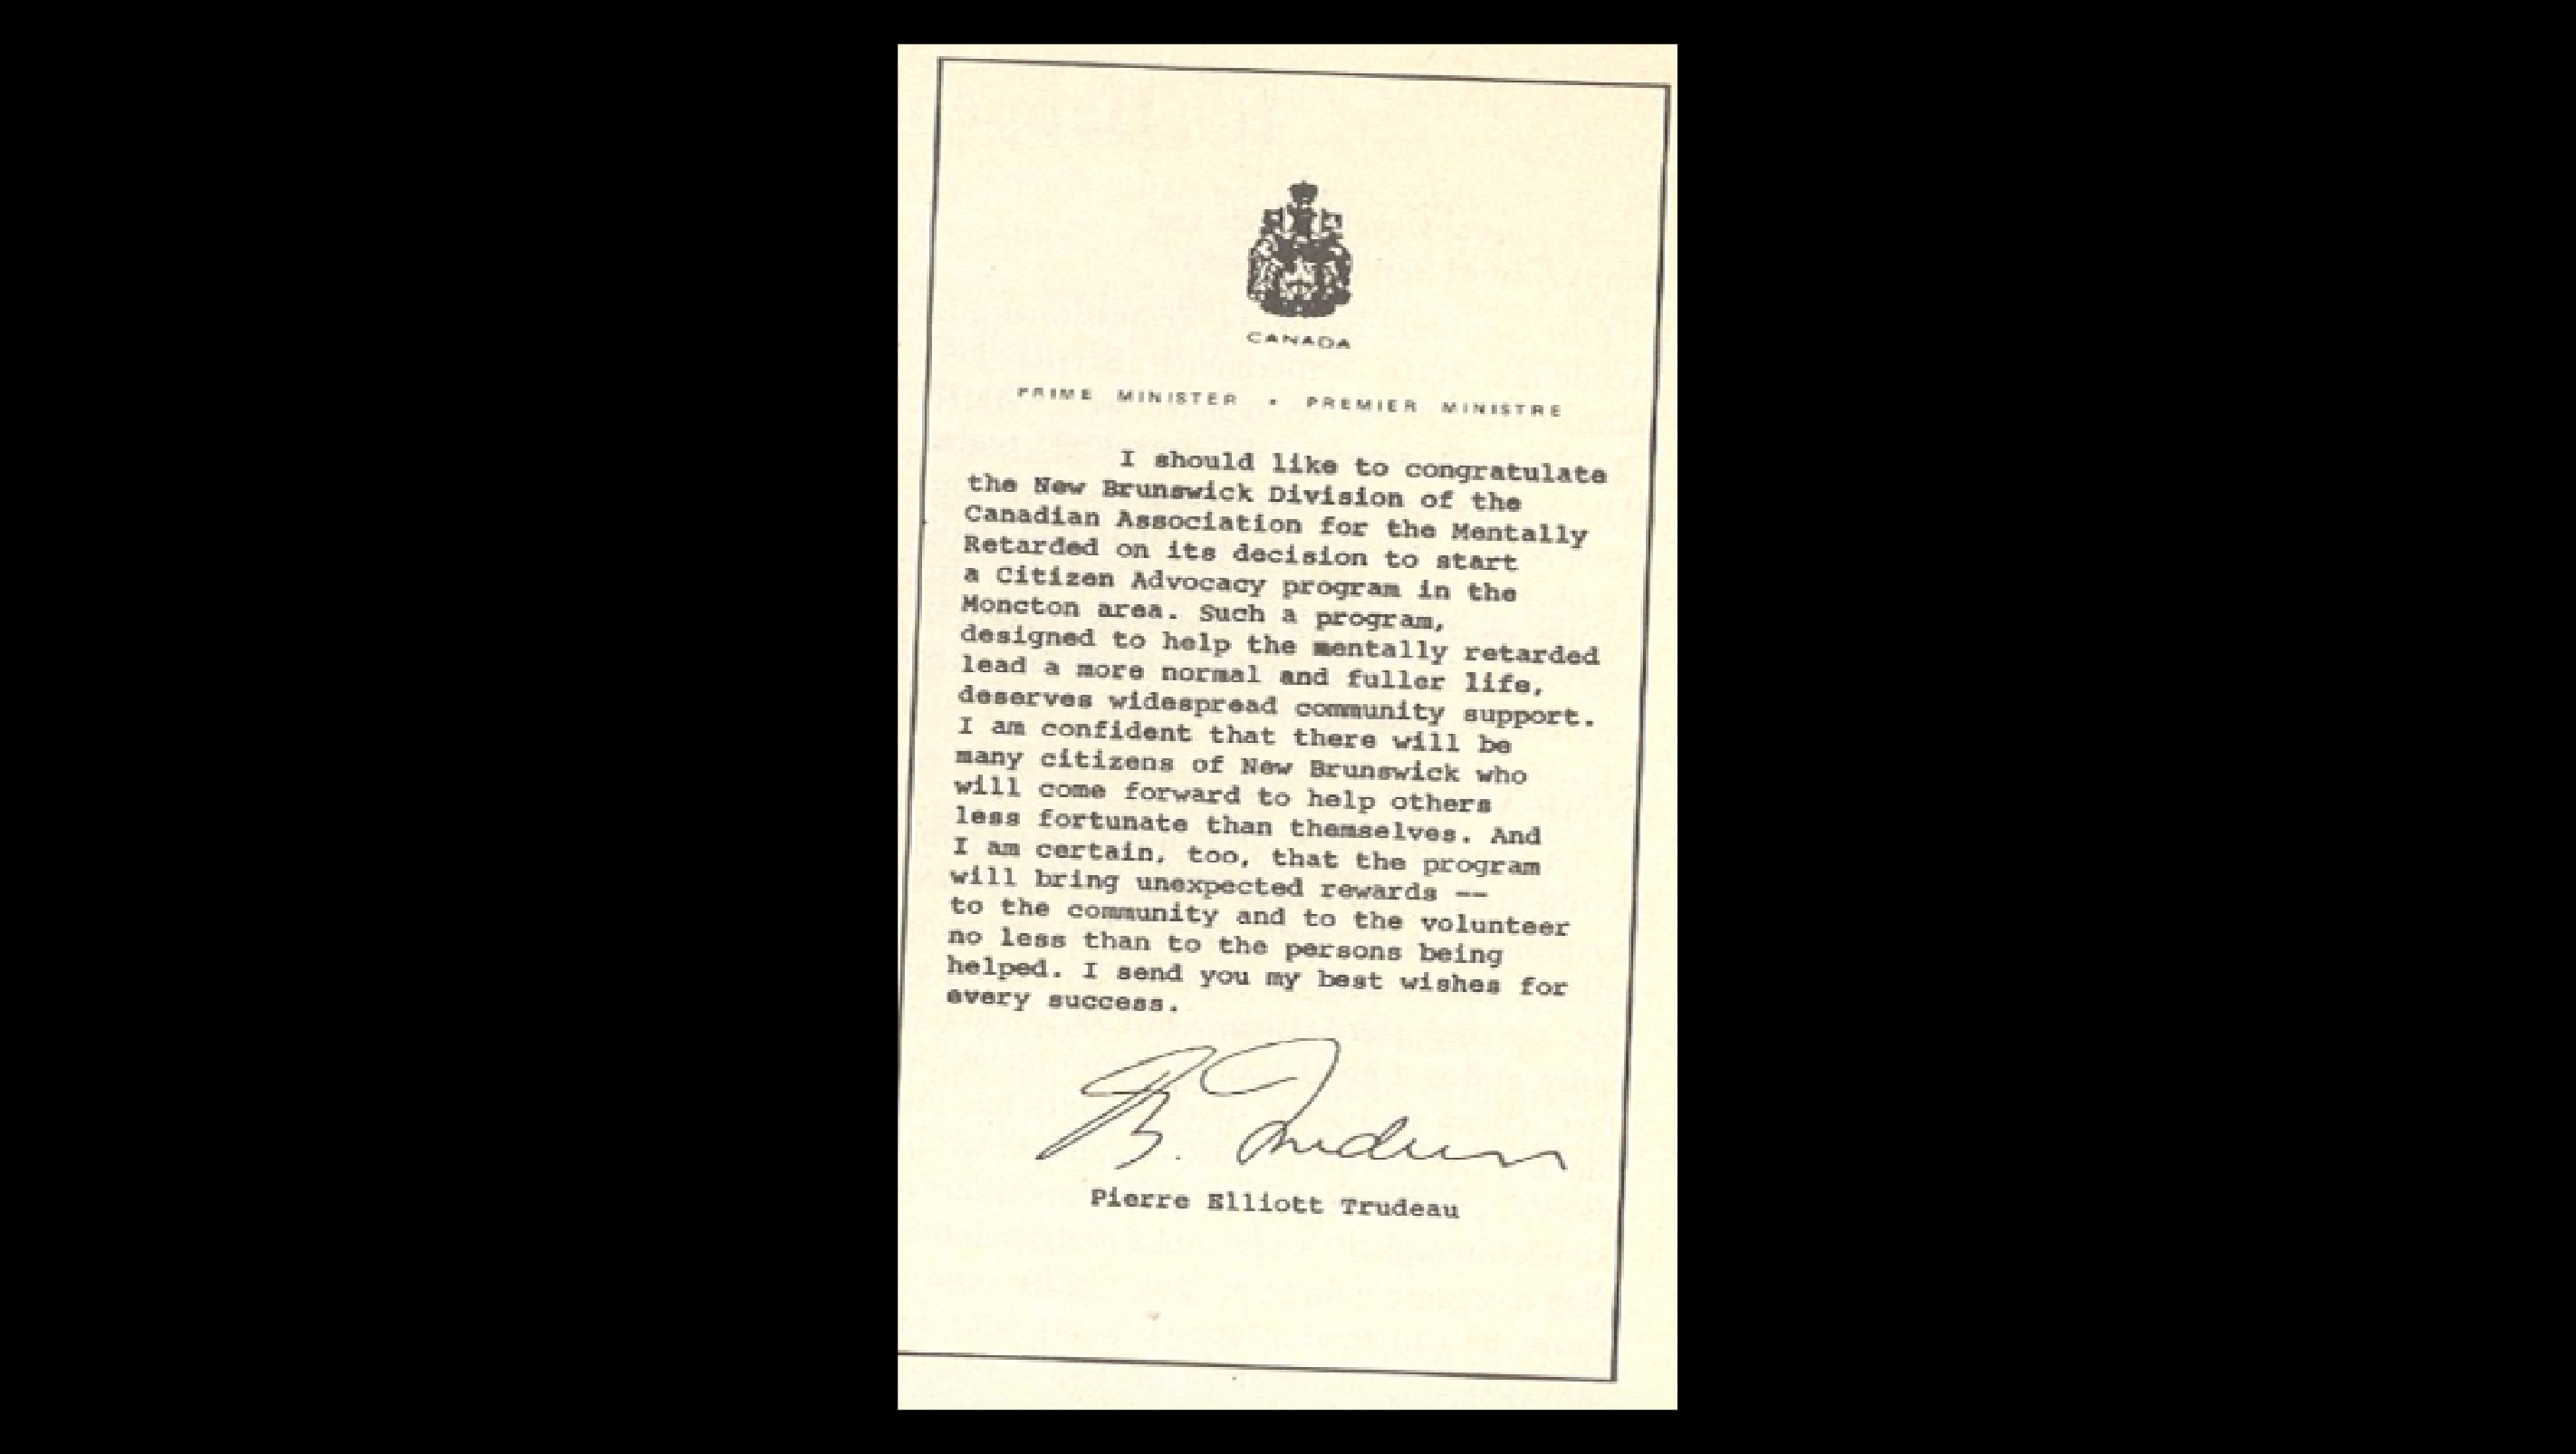 A type-written letter from Pierre Elliot Trudeau with the Prime Minster’s seal.